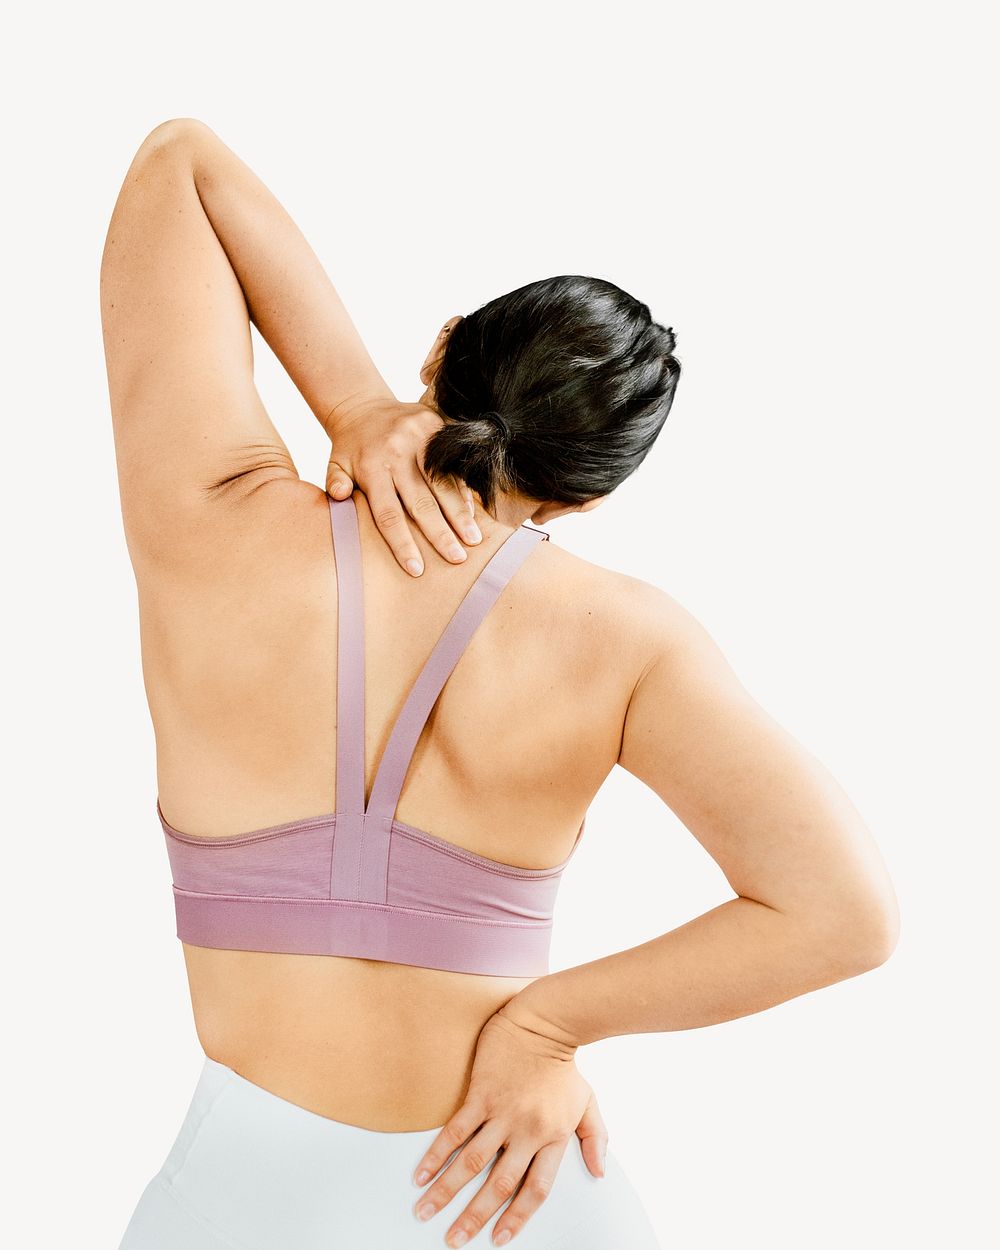 Woman back pain, isolated image